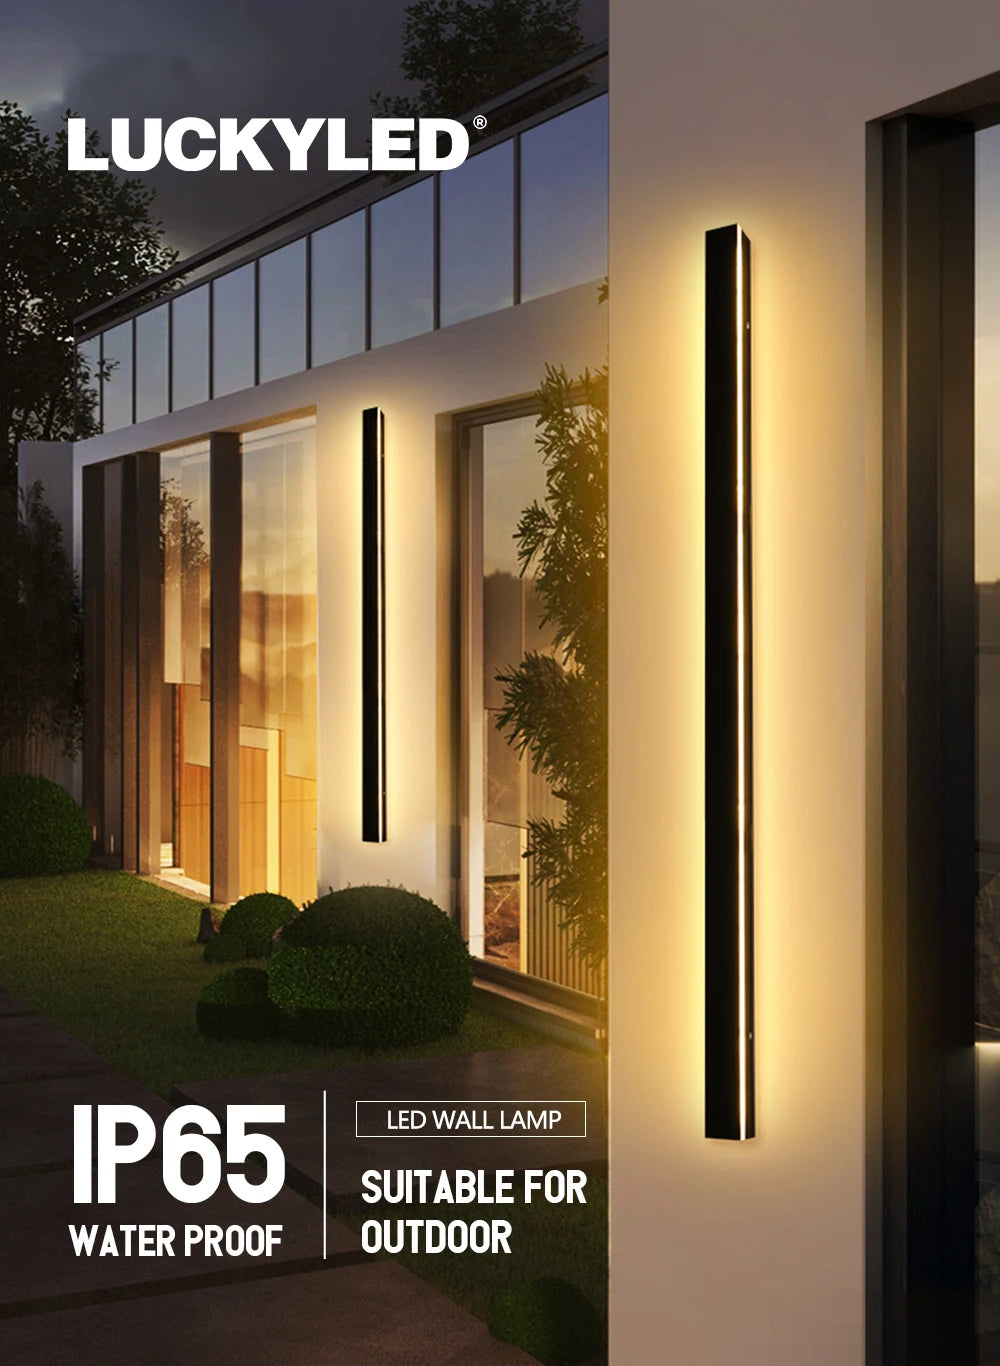 LUCKYLED Modern Led Wall Light, Waterproof LED wall lamp for outdoor use in wet conditions.